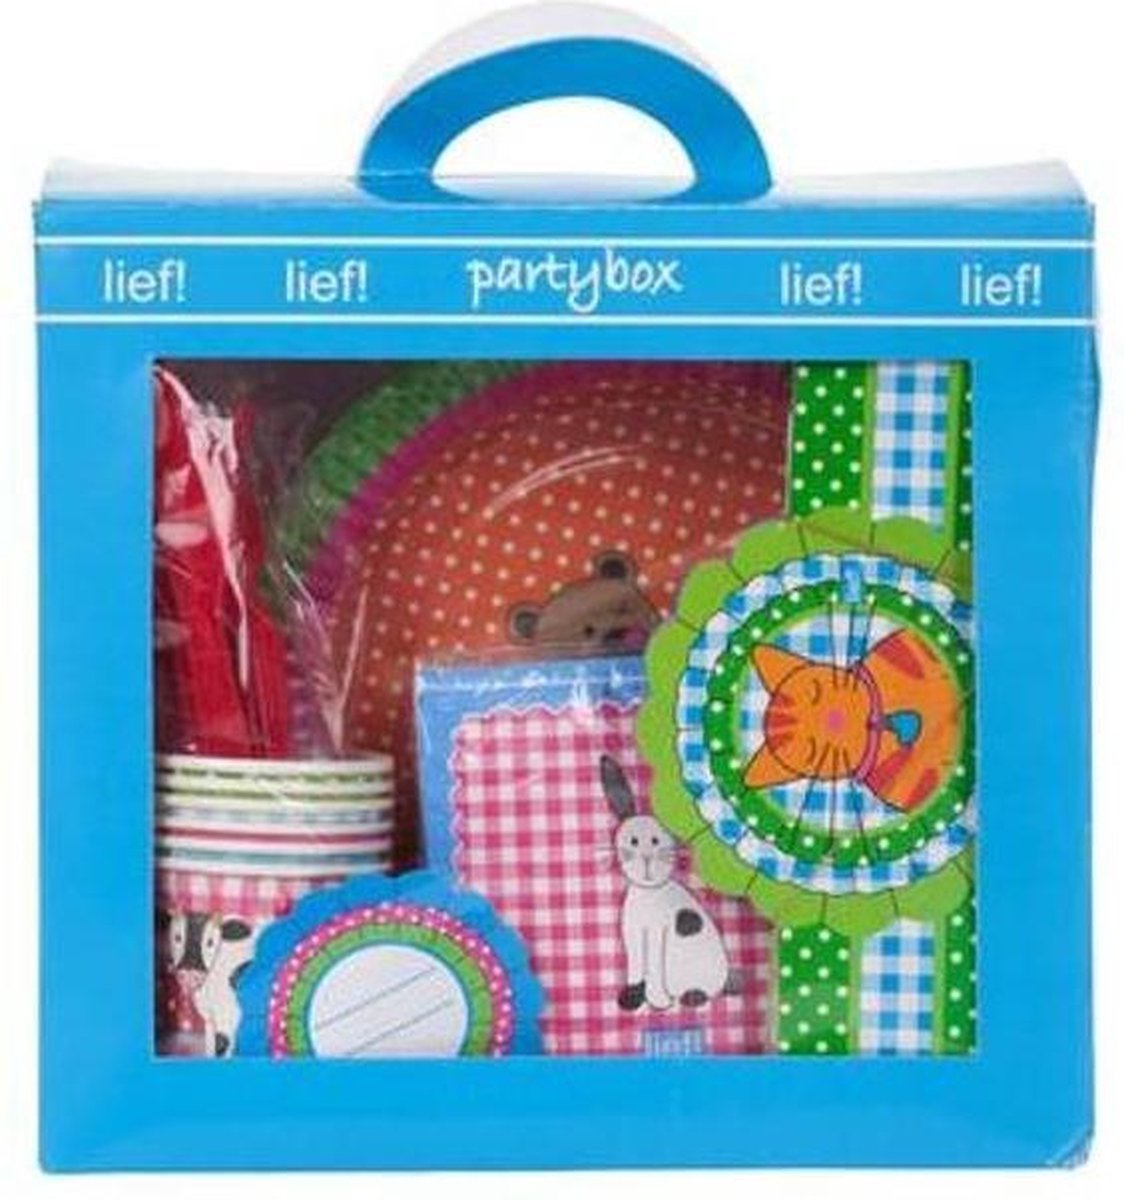 Lief! Party Box